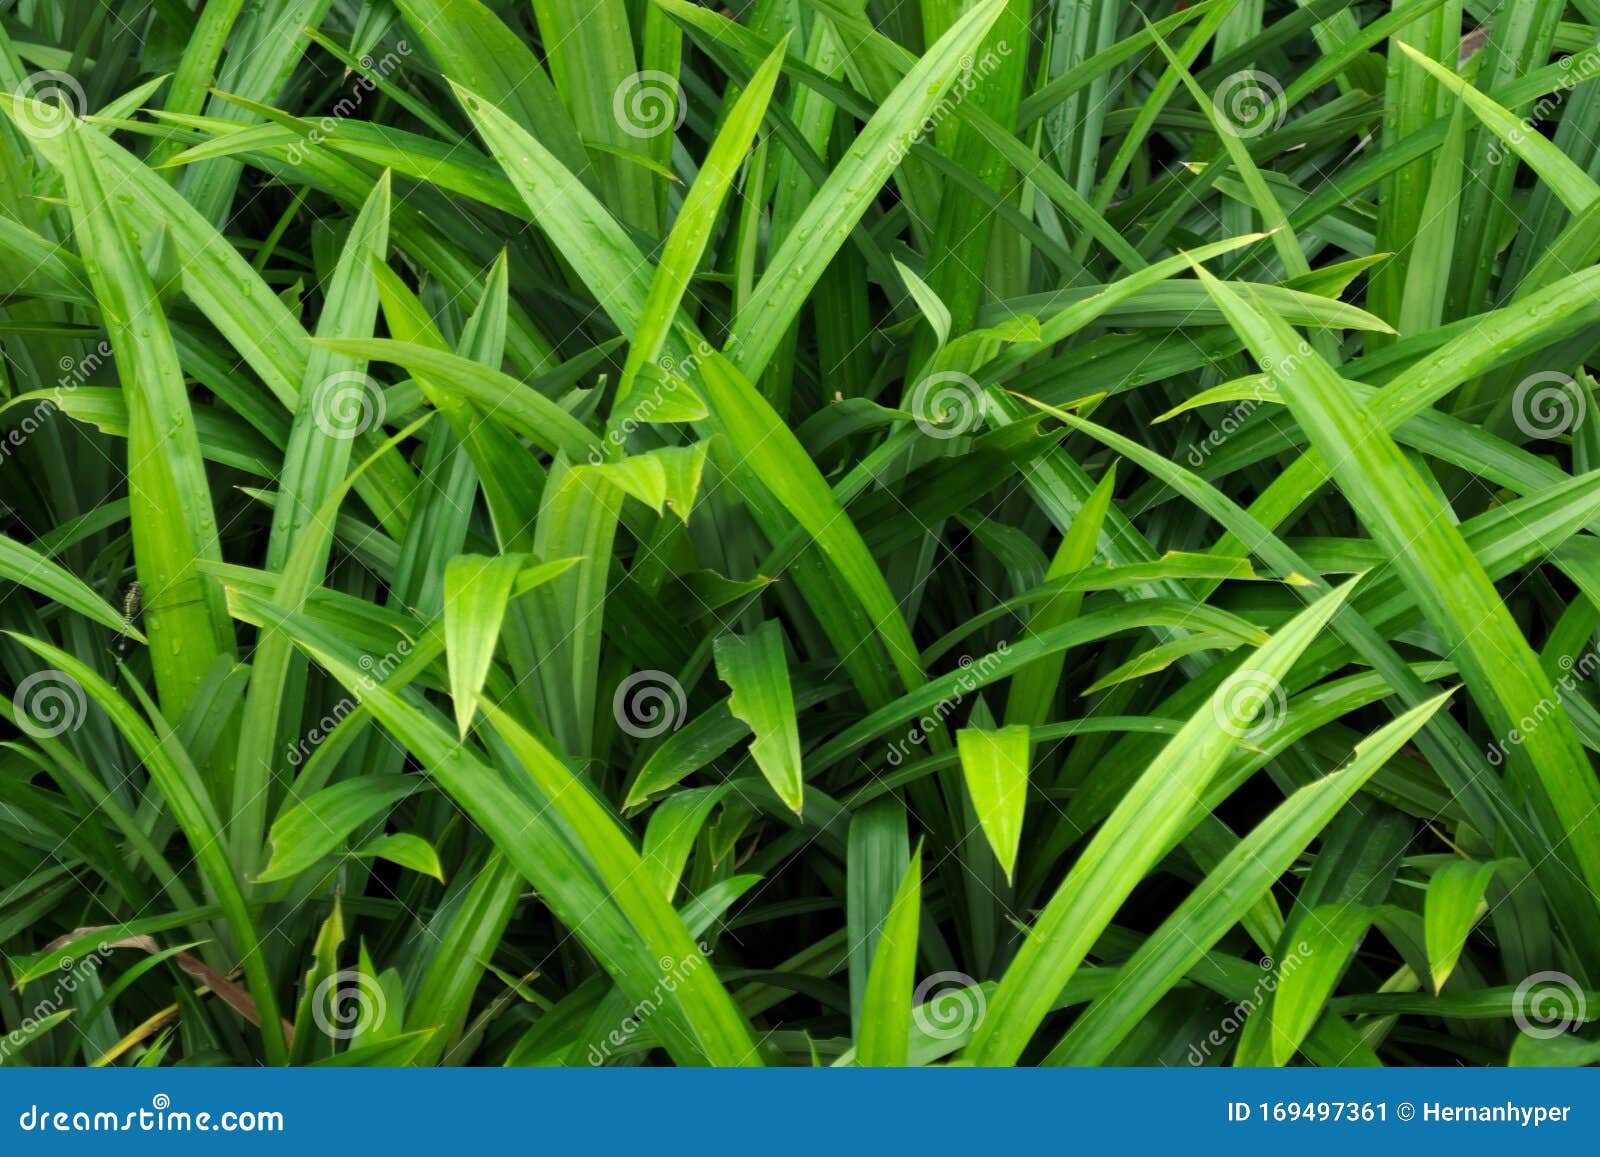 Lush, Vivid Green Grass, Close Up Detail. Useful As Background. Stock